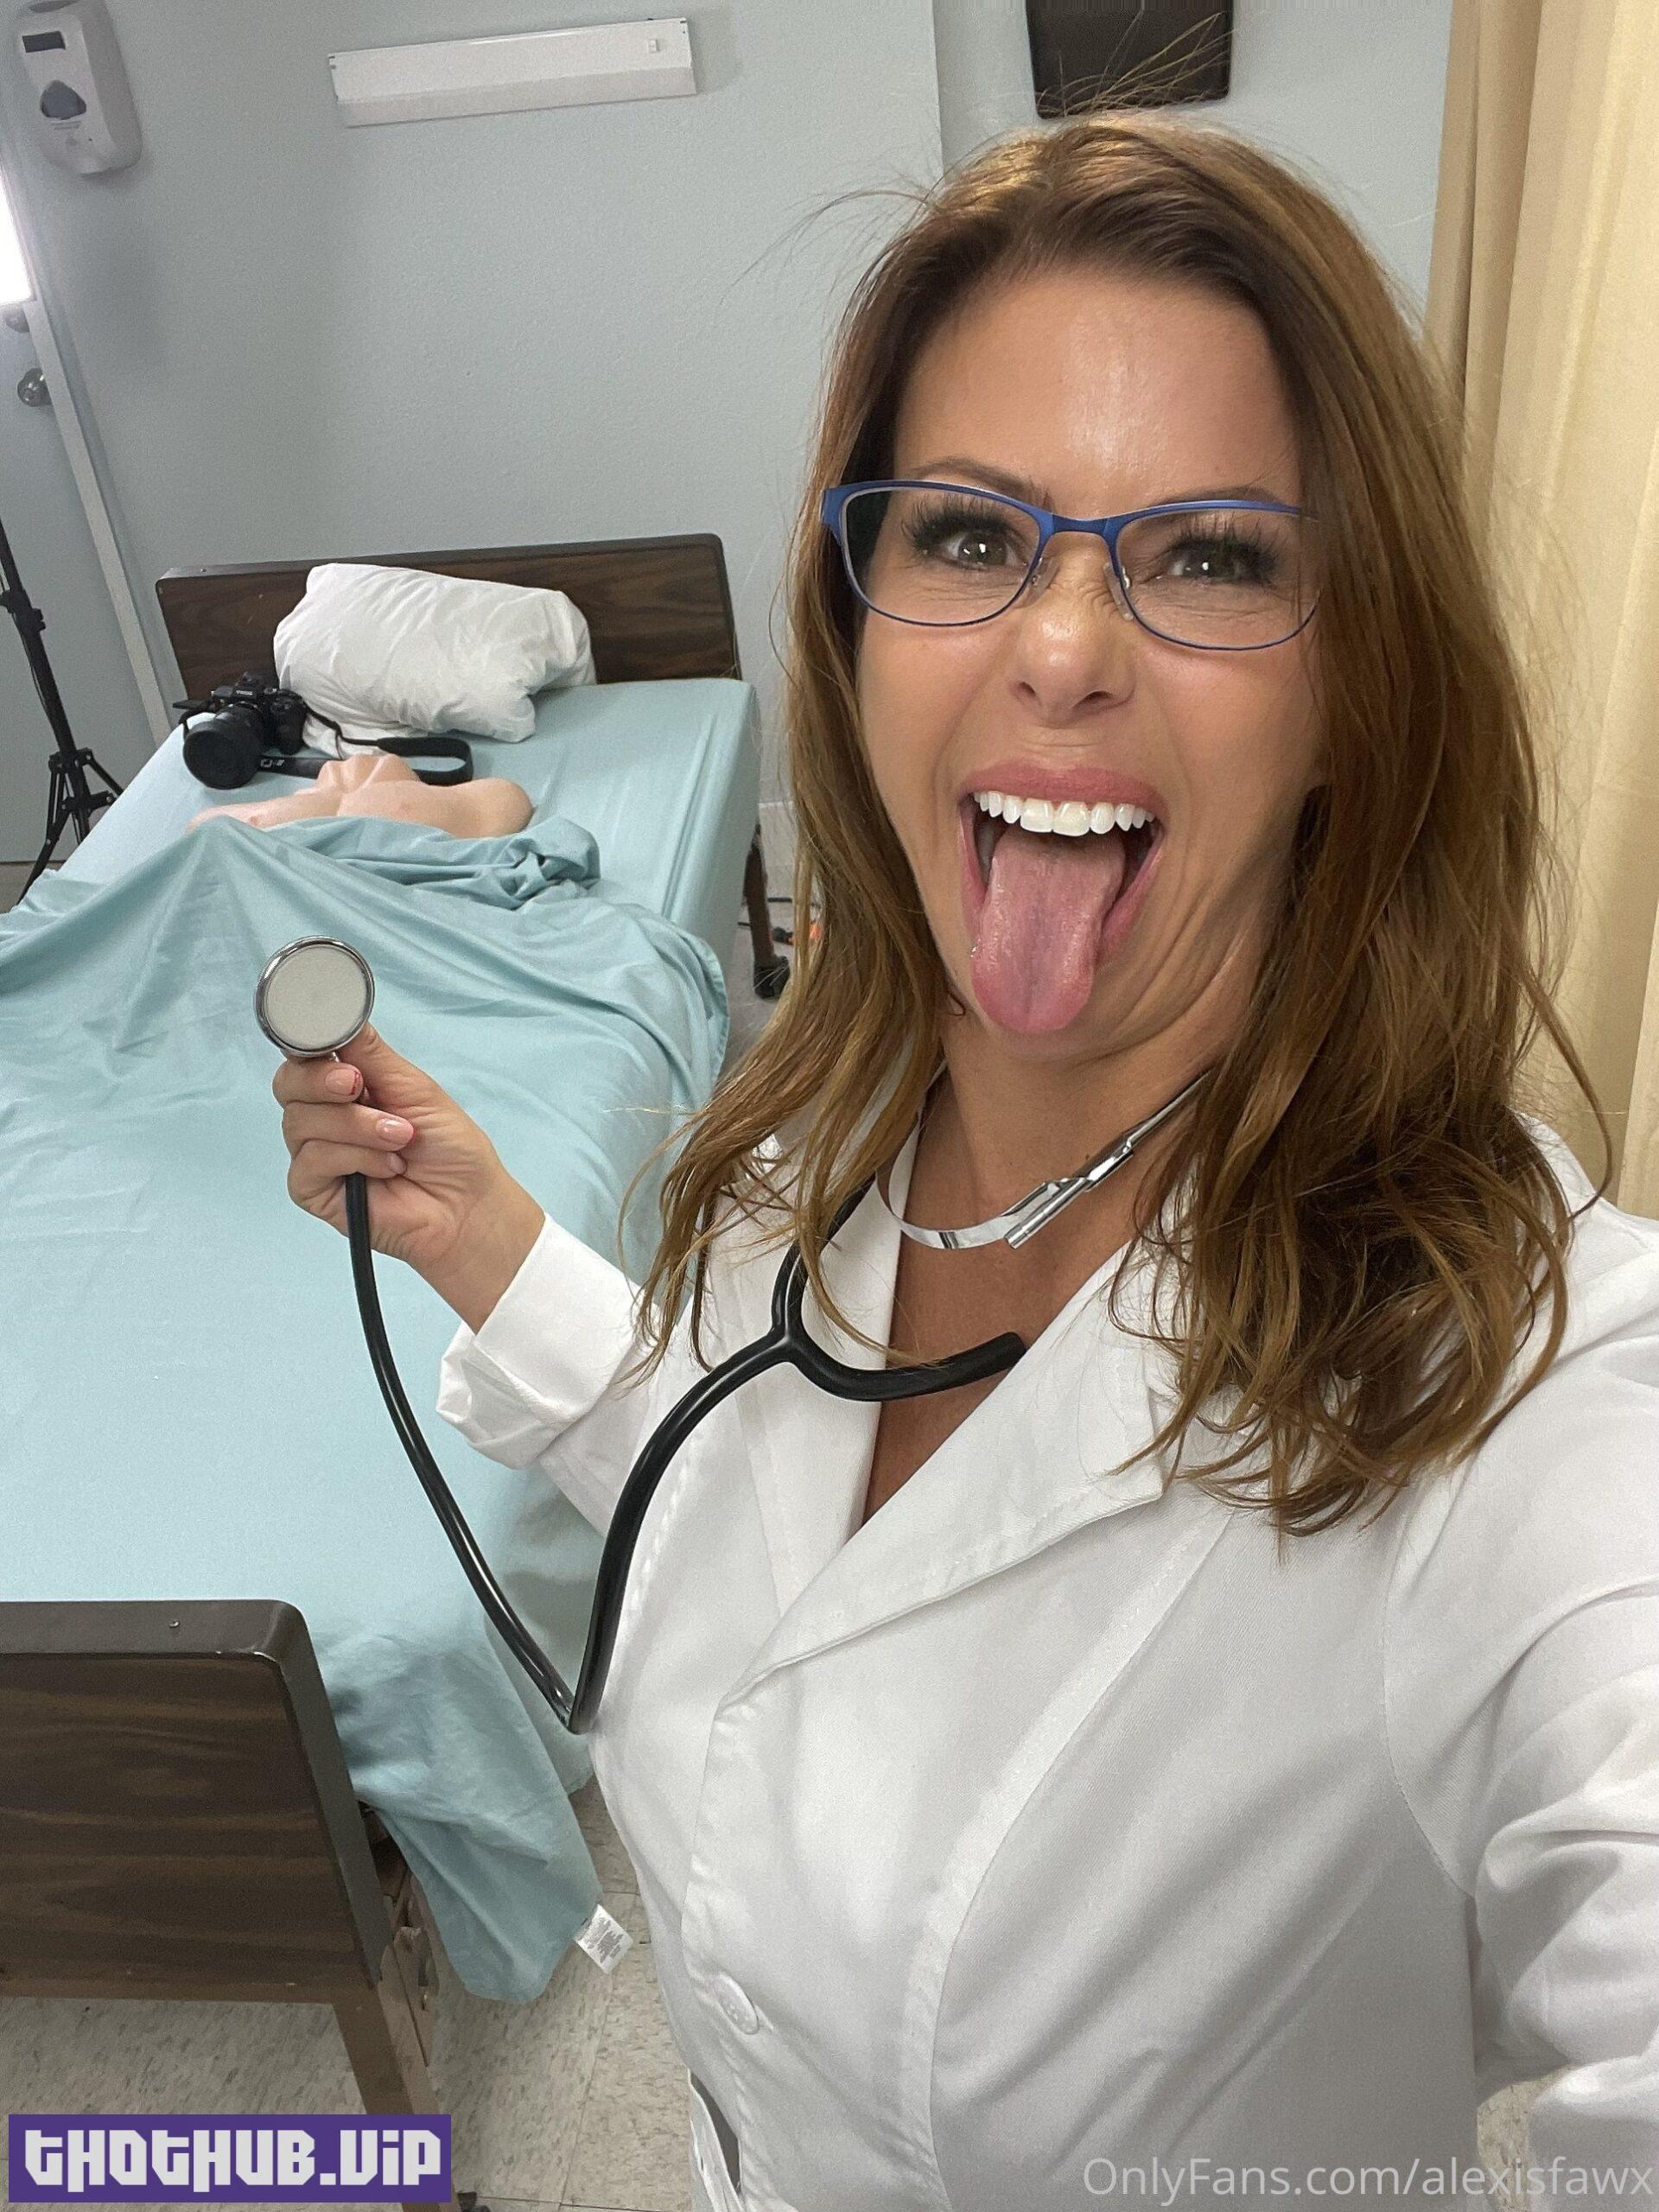 1666744900 711 Top Hot Alexis Fawx Porn Image Gallery Leaks OF